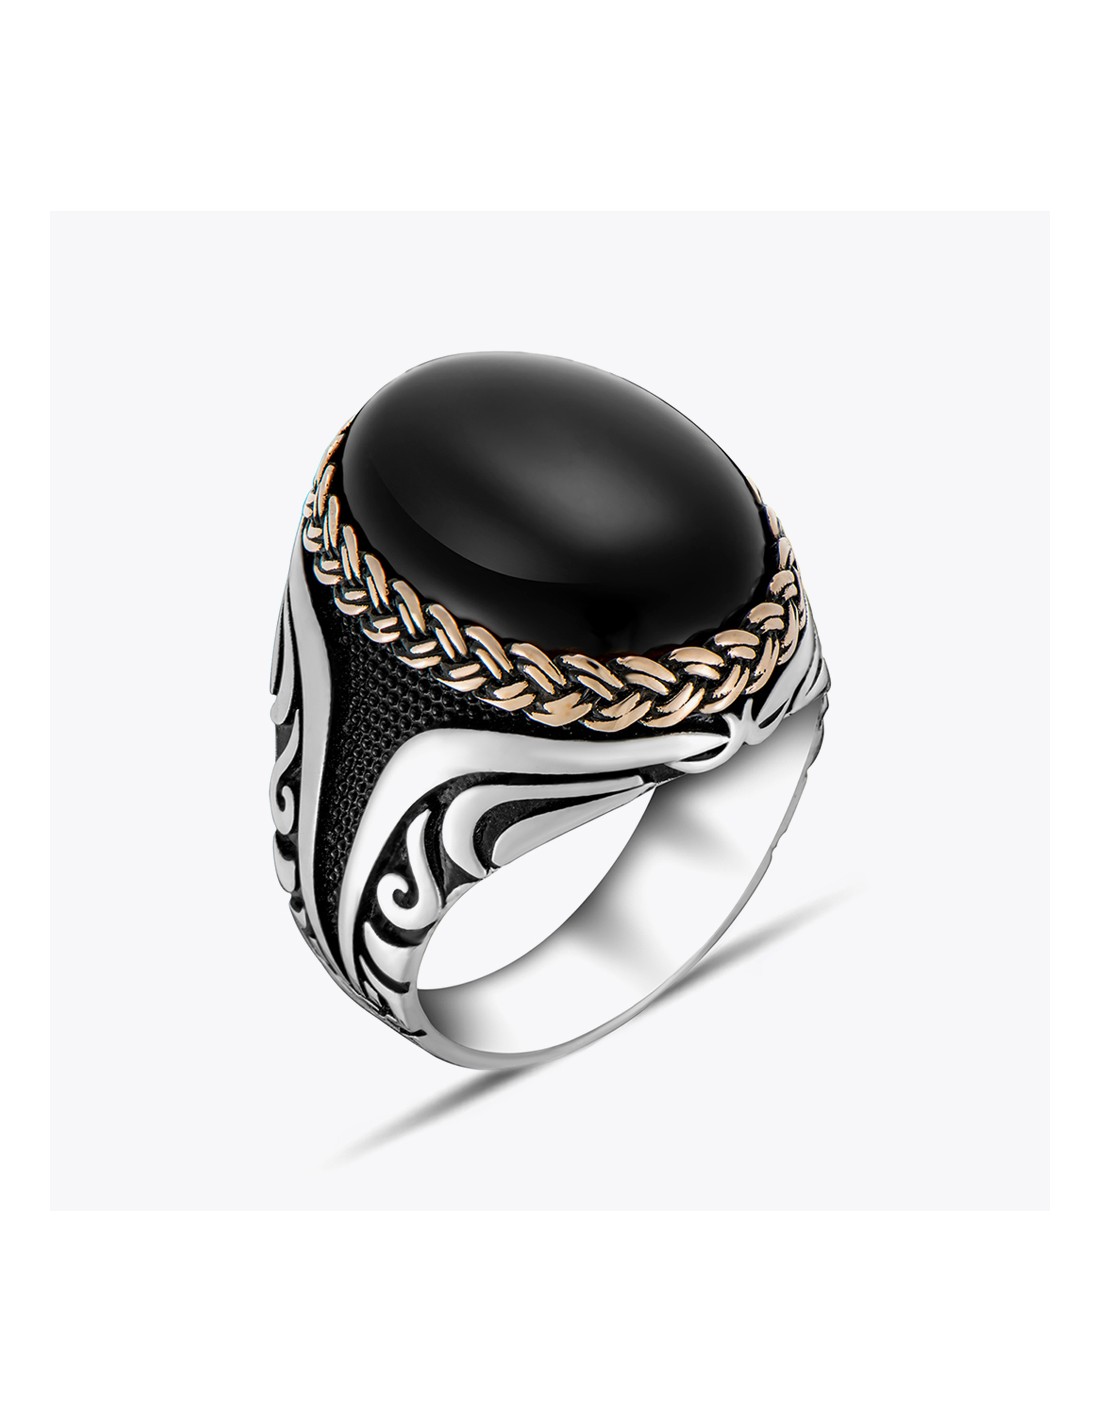 Buy Black Onyx Stone Silver Ring, Baroque Patterned Men's Ring, Black Stone  Men's Ring, Gift Men's Ring Online in India - Etsy